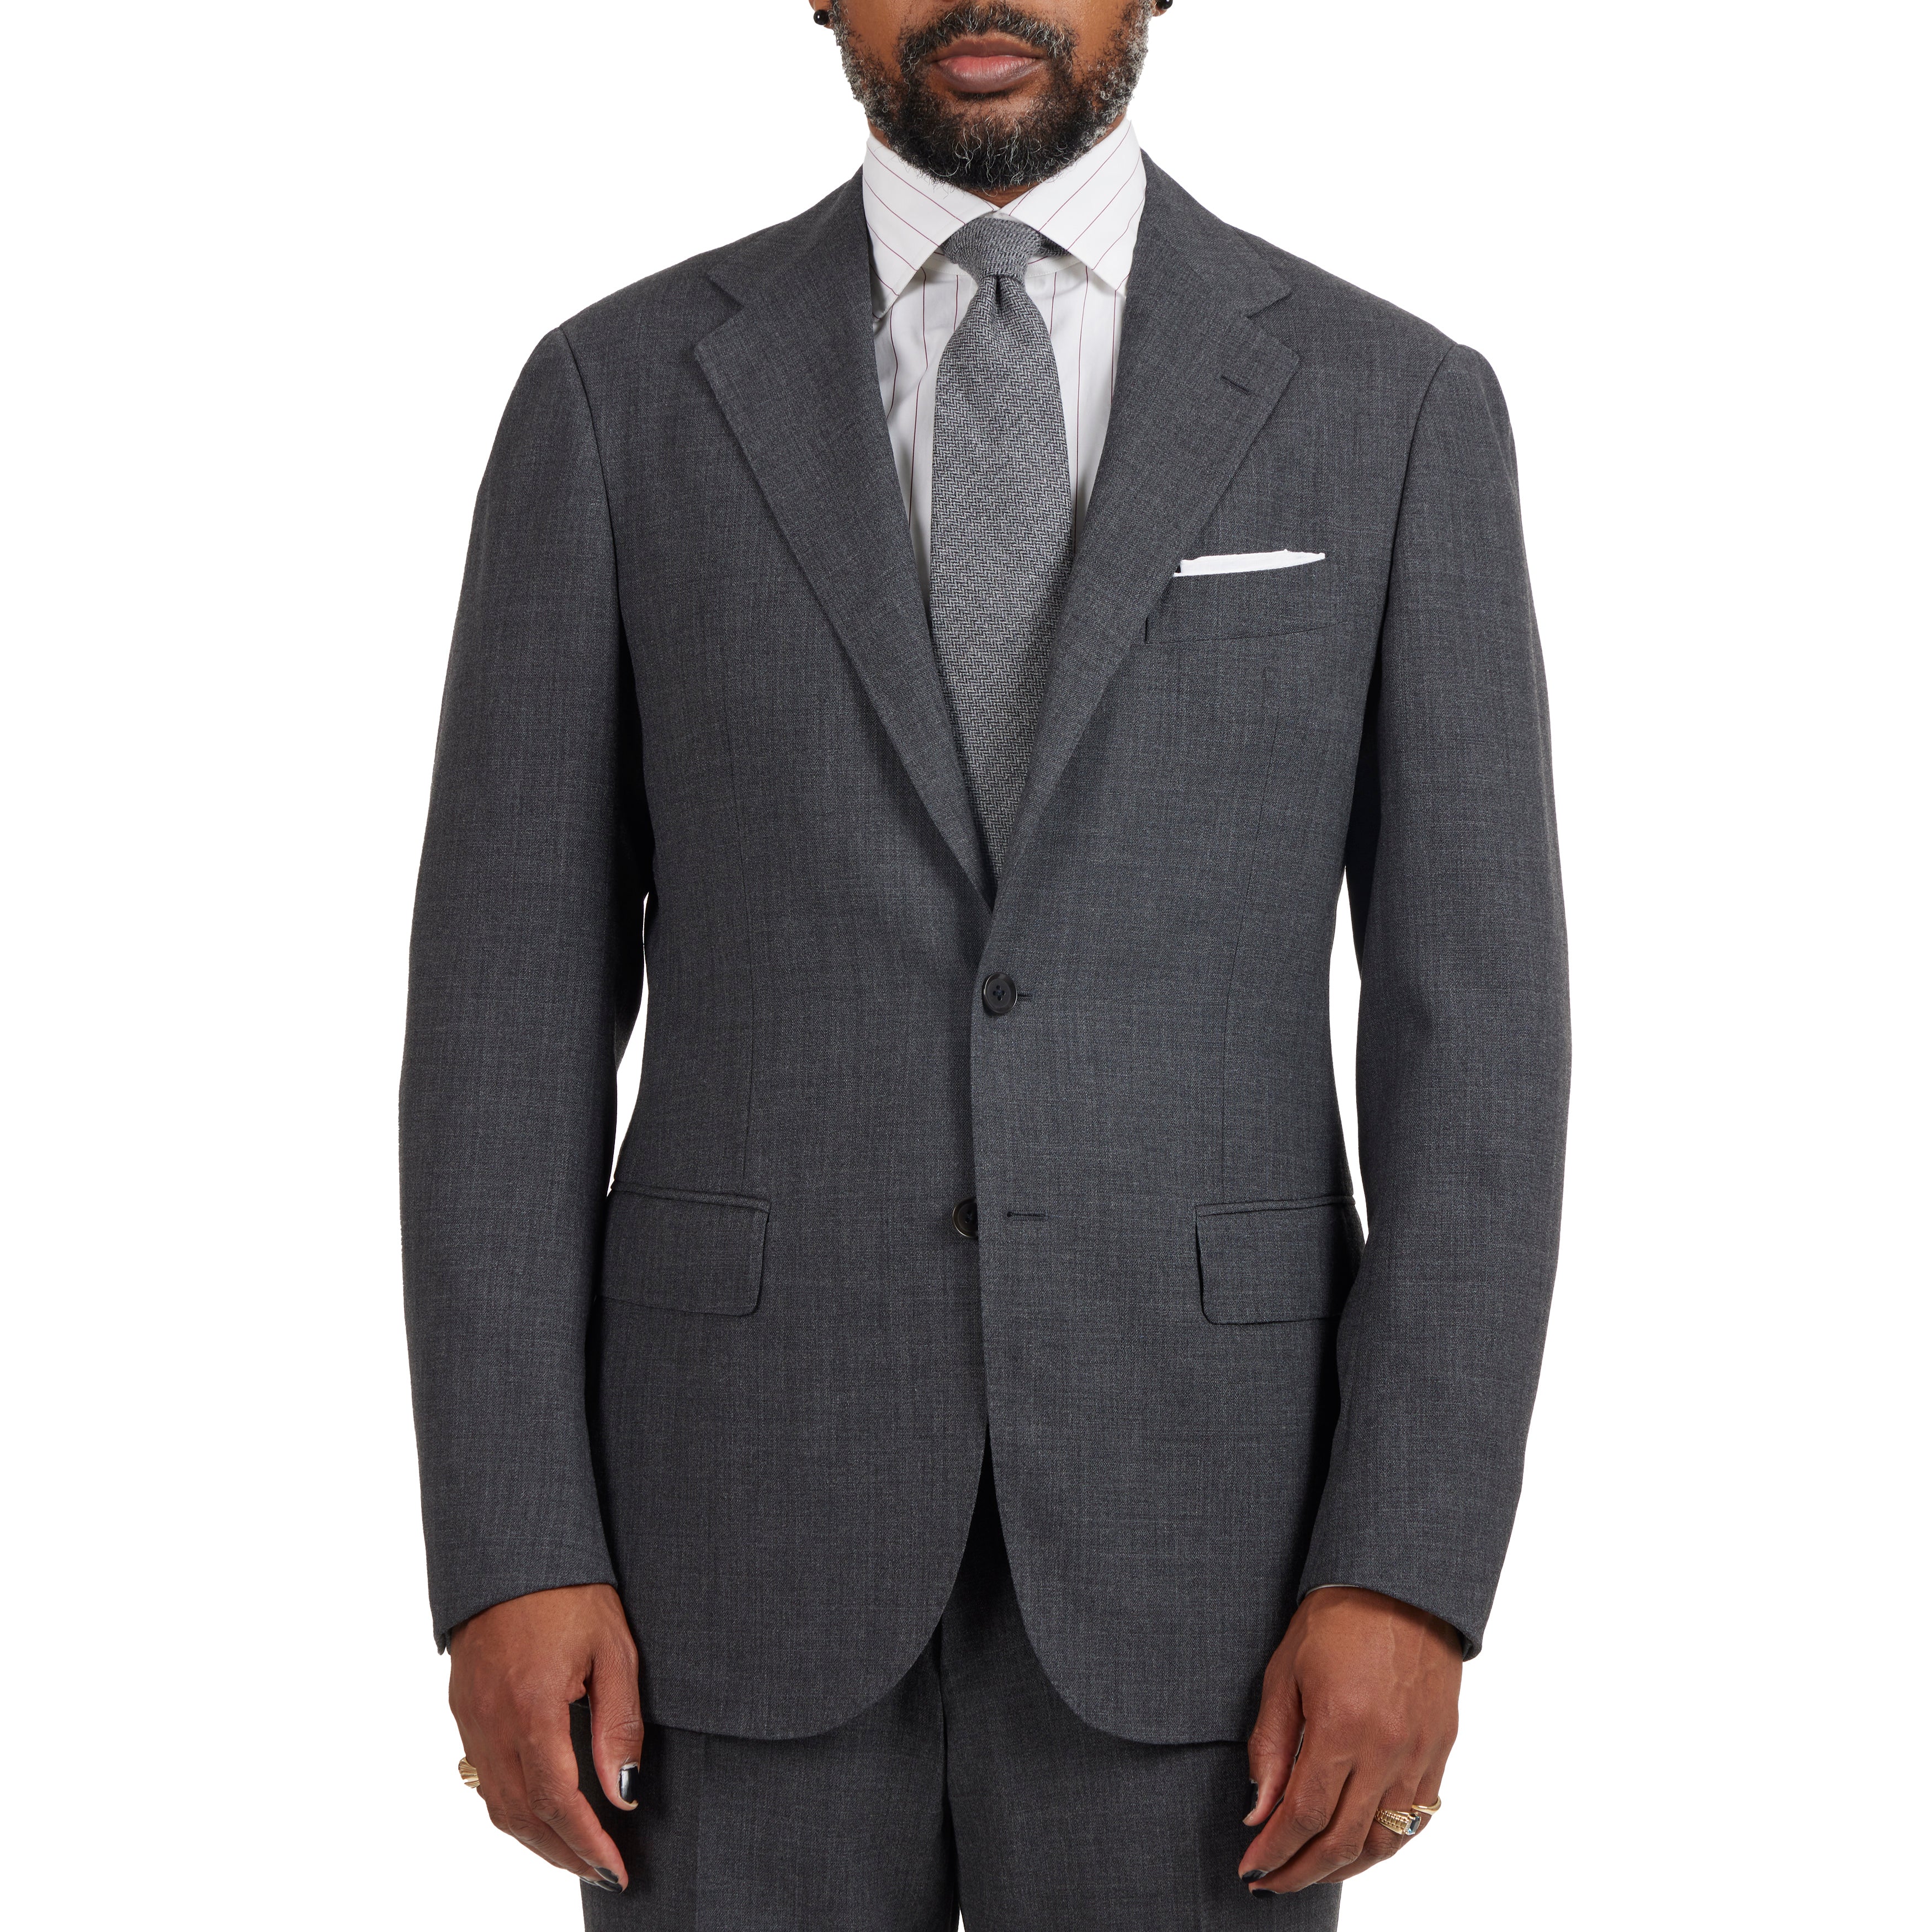 First Class High-twist Wool Model 3A Suit - The Armoury